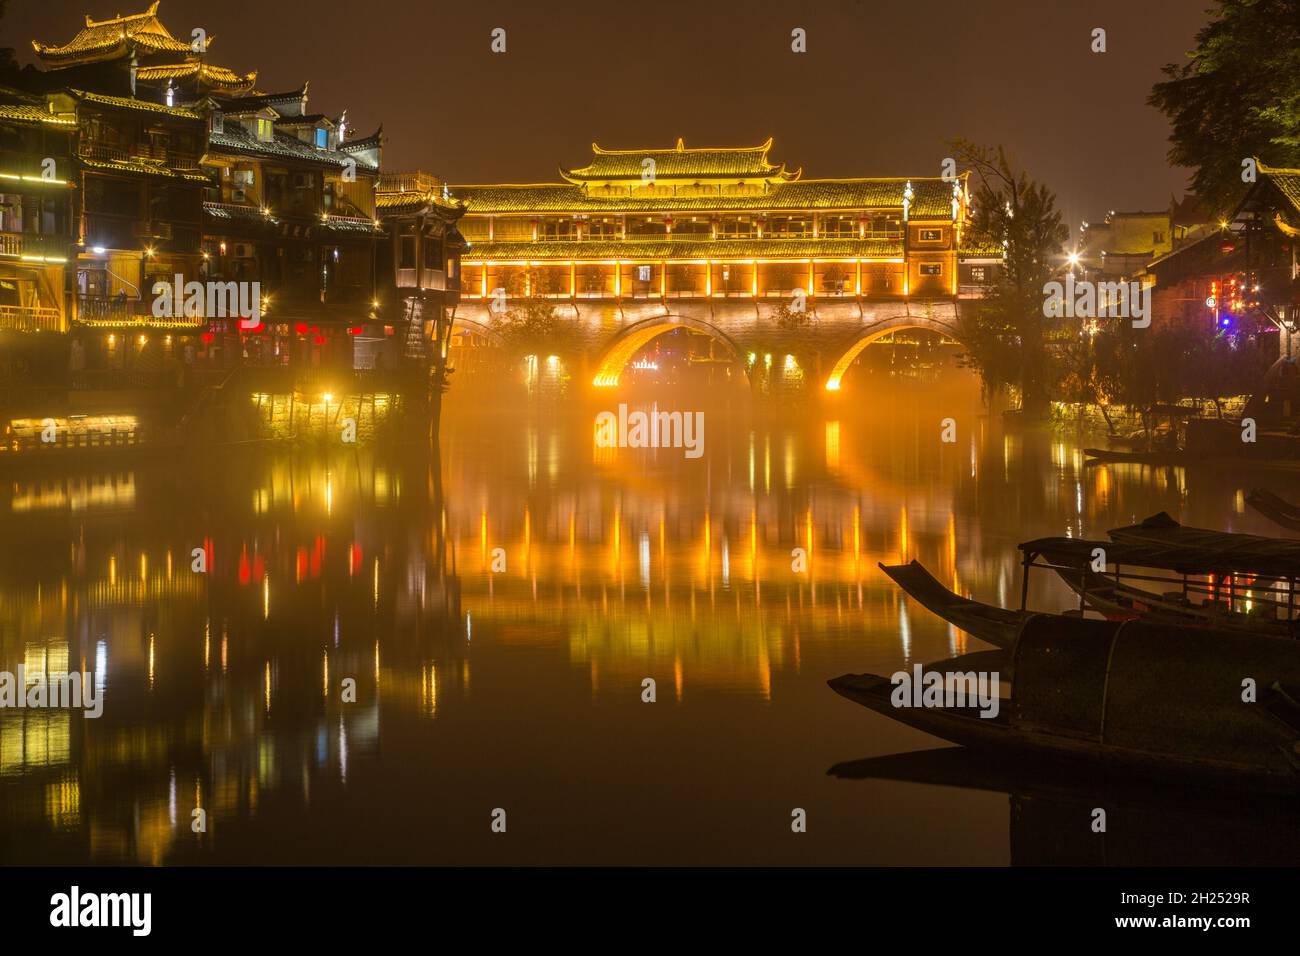 The Phoenix Hong or Hongqiao Bridge was built in the MIao style over the Tuojing River, Fenghuang, China. Stock Photo